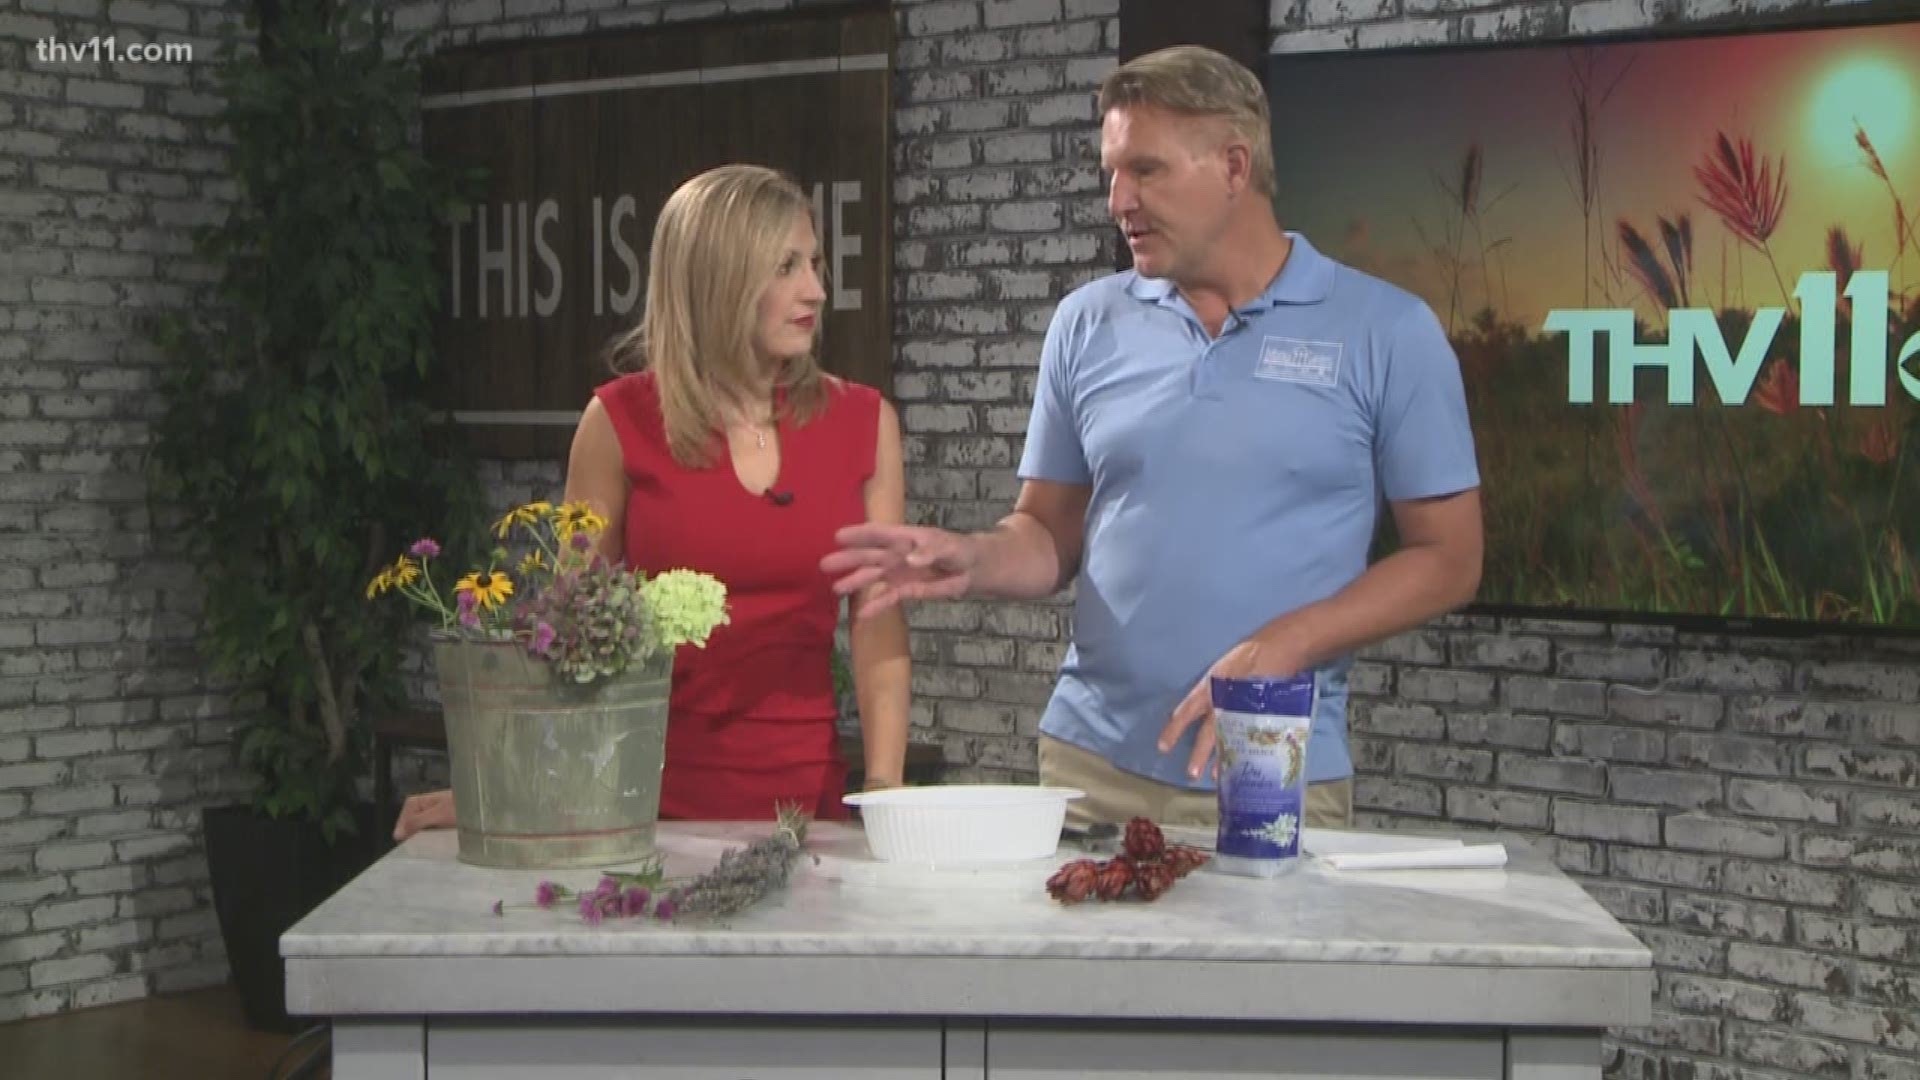 Just before your favorite flowers reach their peak, think about how you might extend their blooming time for months to come by drying them. Chris H. Olsen is here to tell us some easy ways.